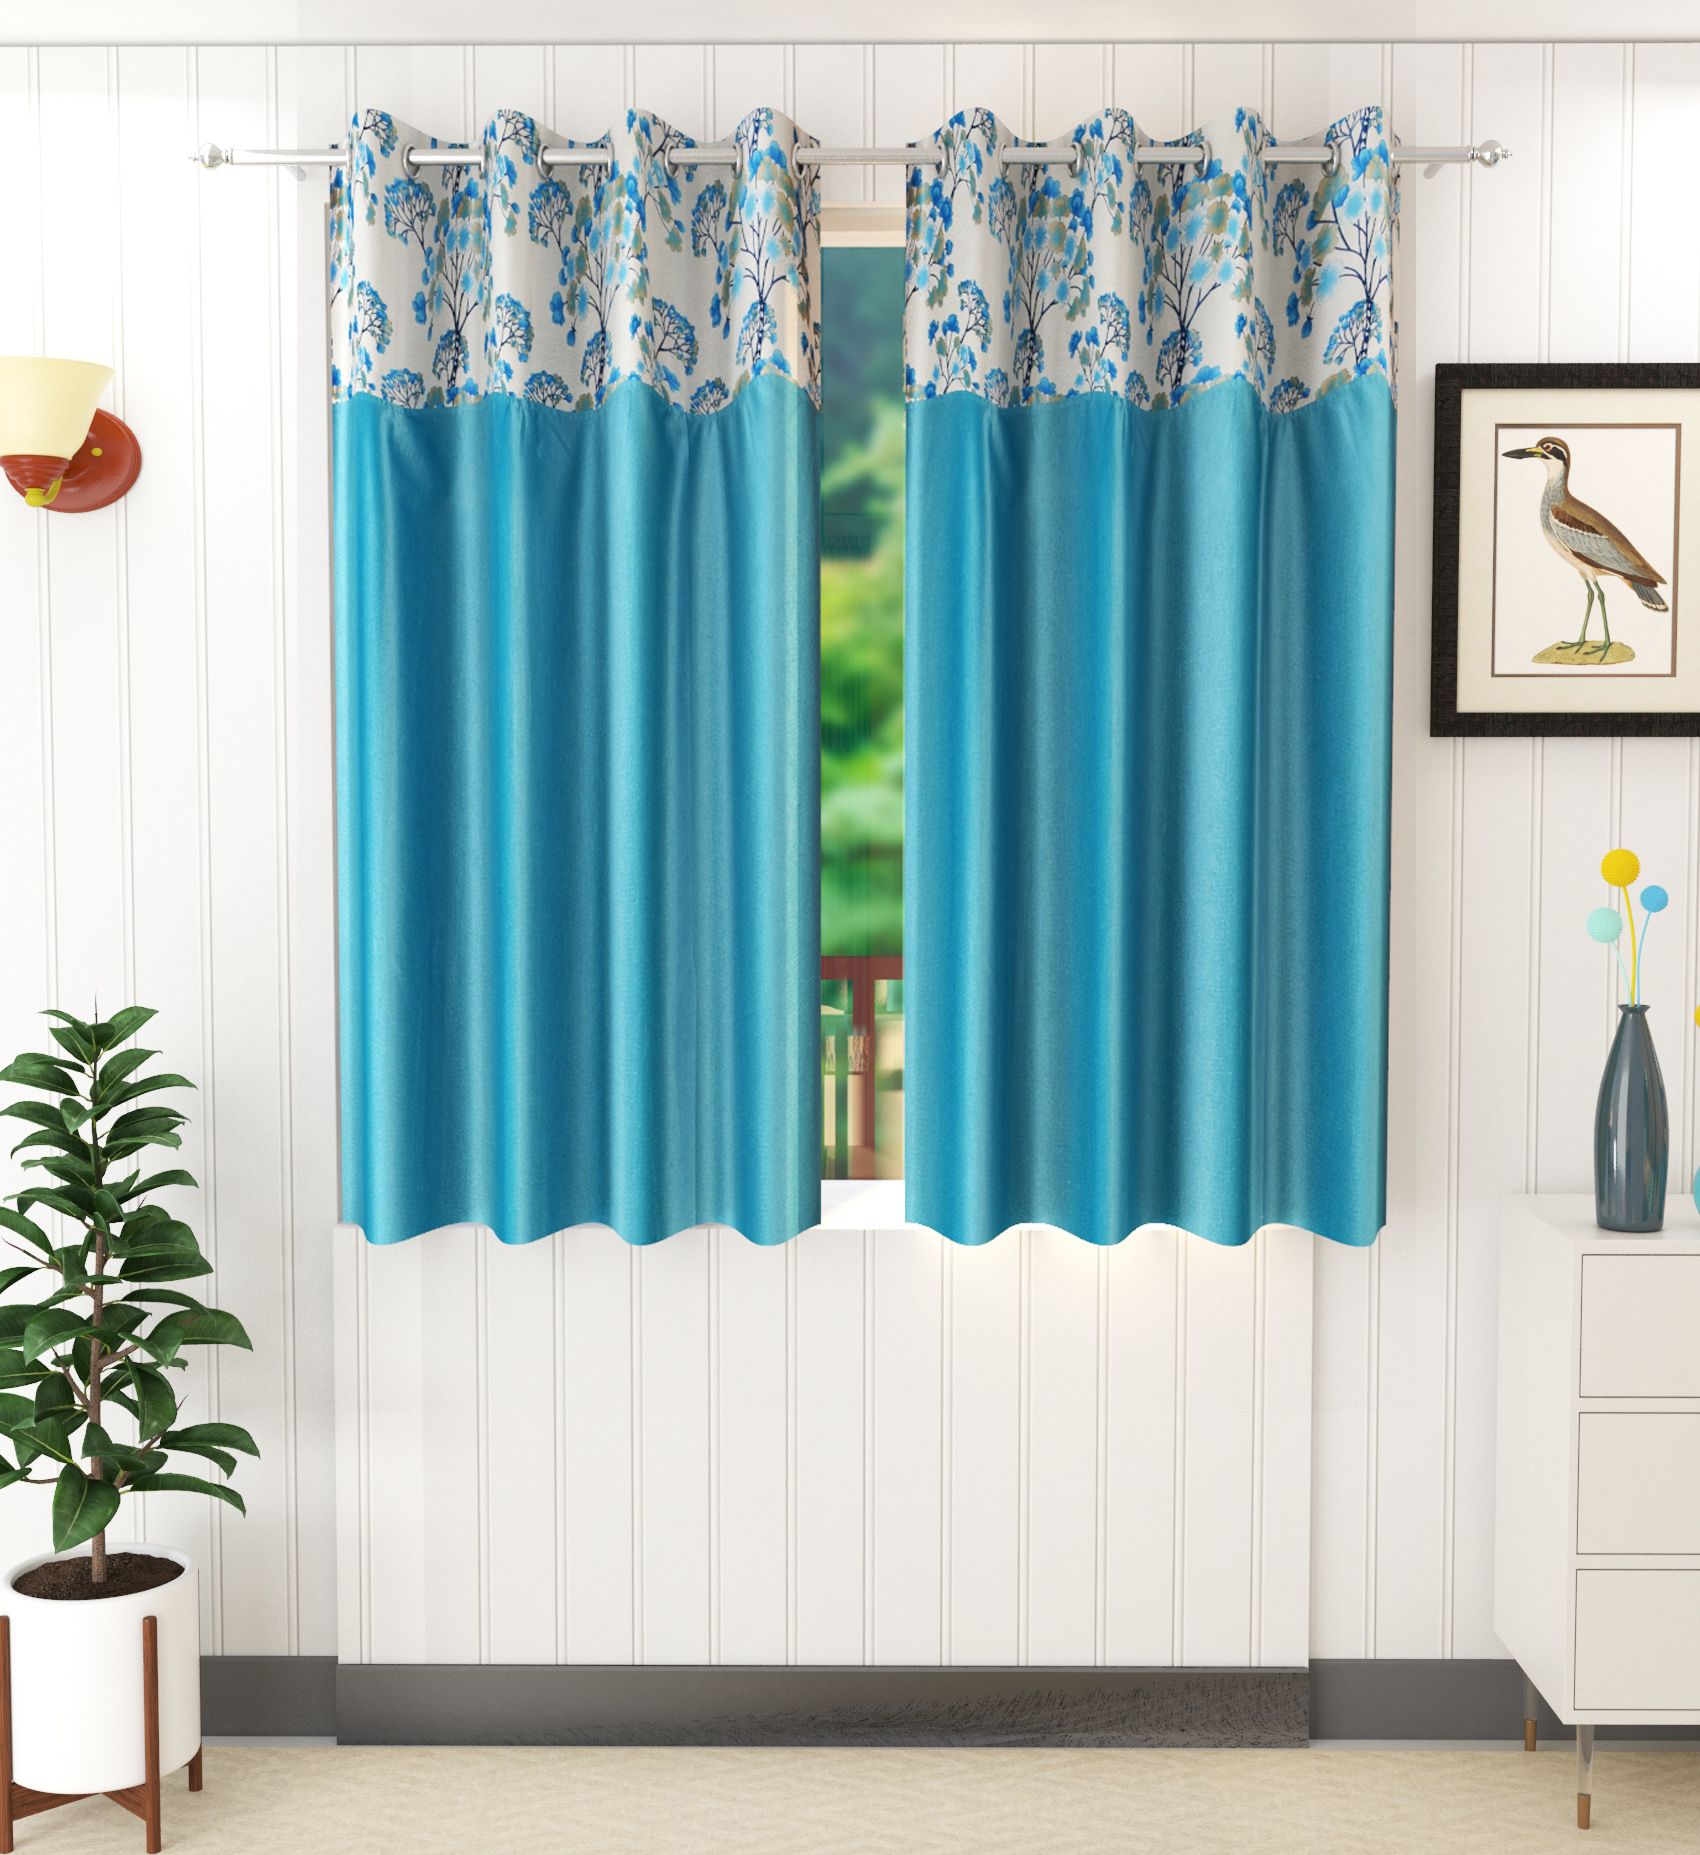     			Homefab India Floral Room Darkening Eyelet Curtain 5 ft ( Pack of 2 ) - Turquoise